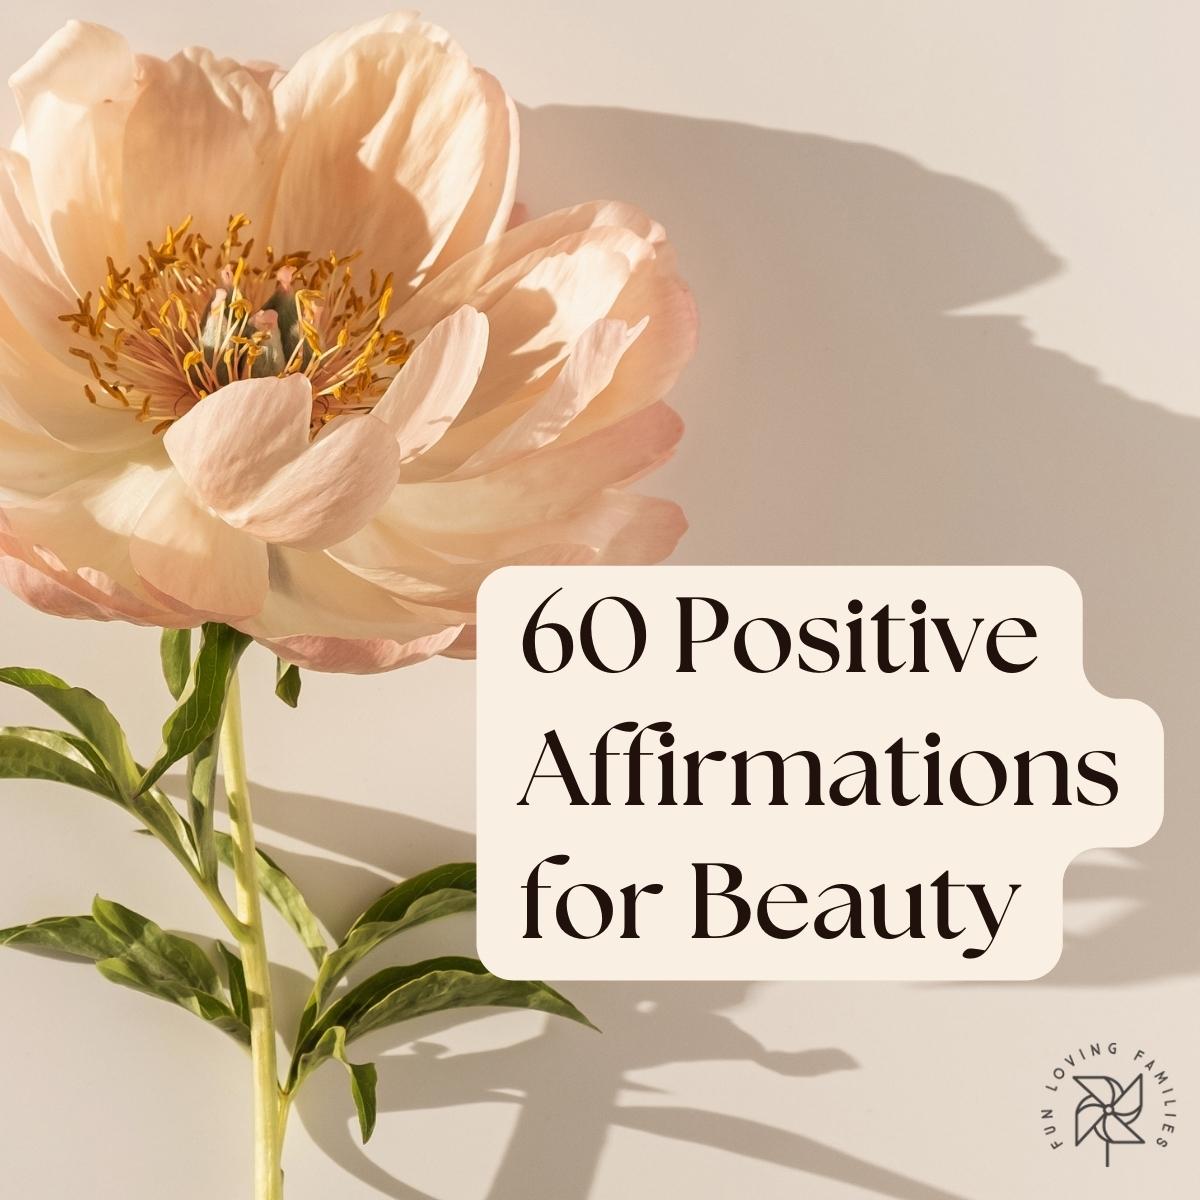 Positive Affirmations for Beauty